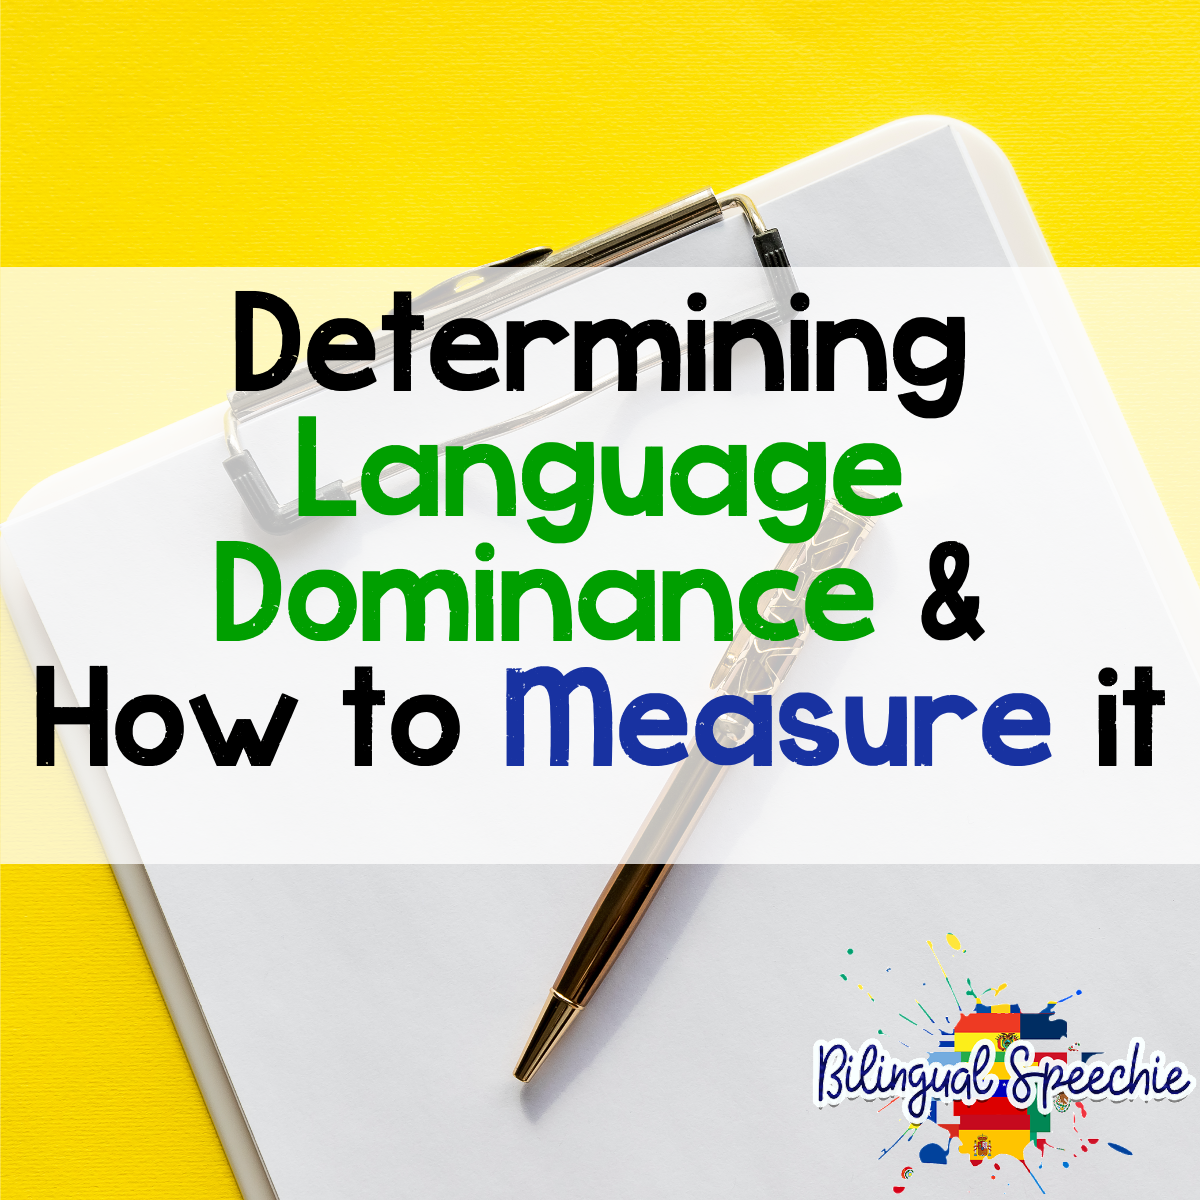 Determining Language Dominance: Why It's Important & How to Measure It